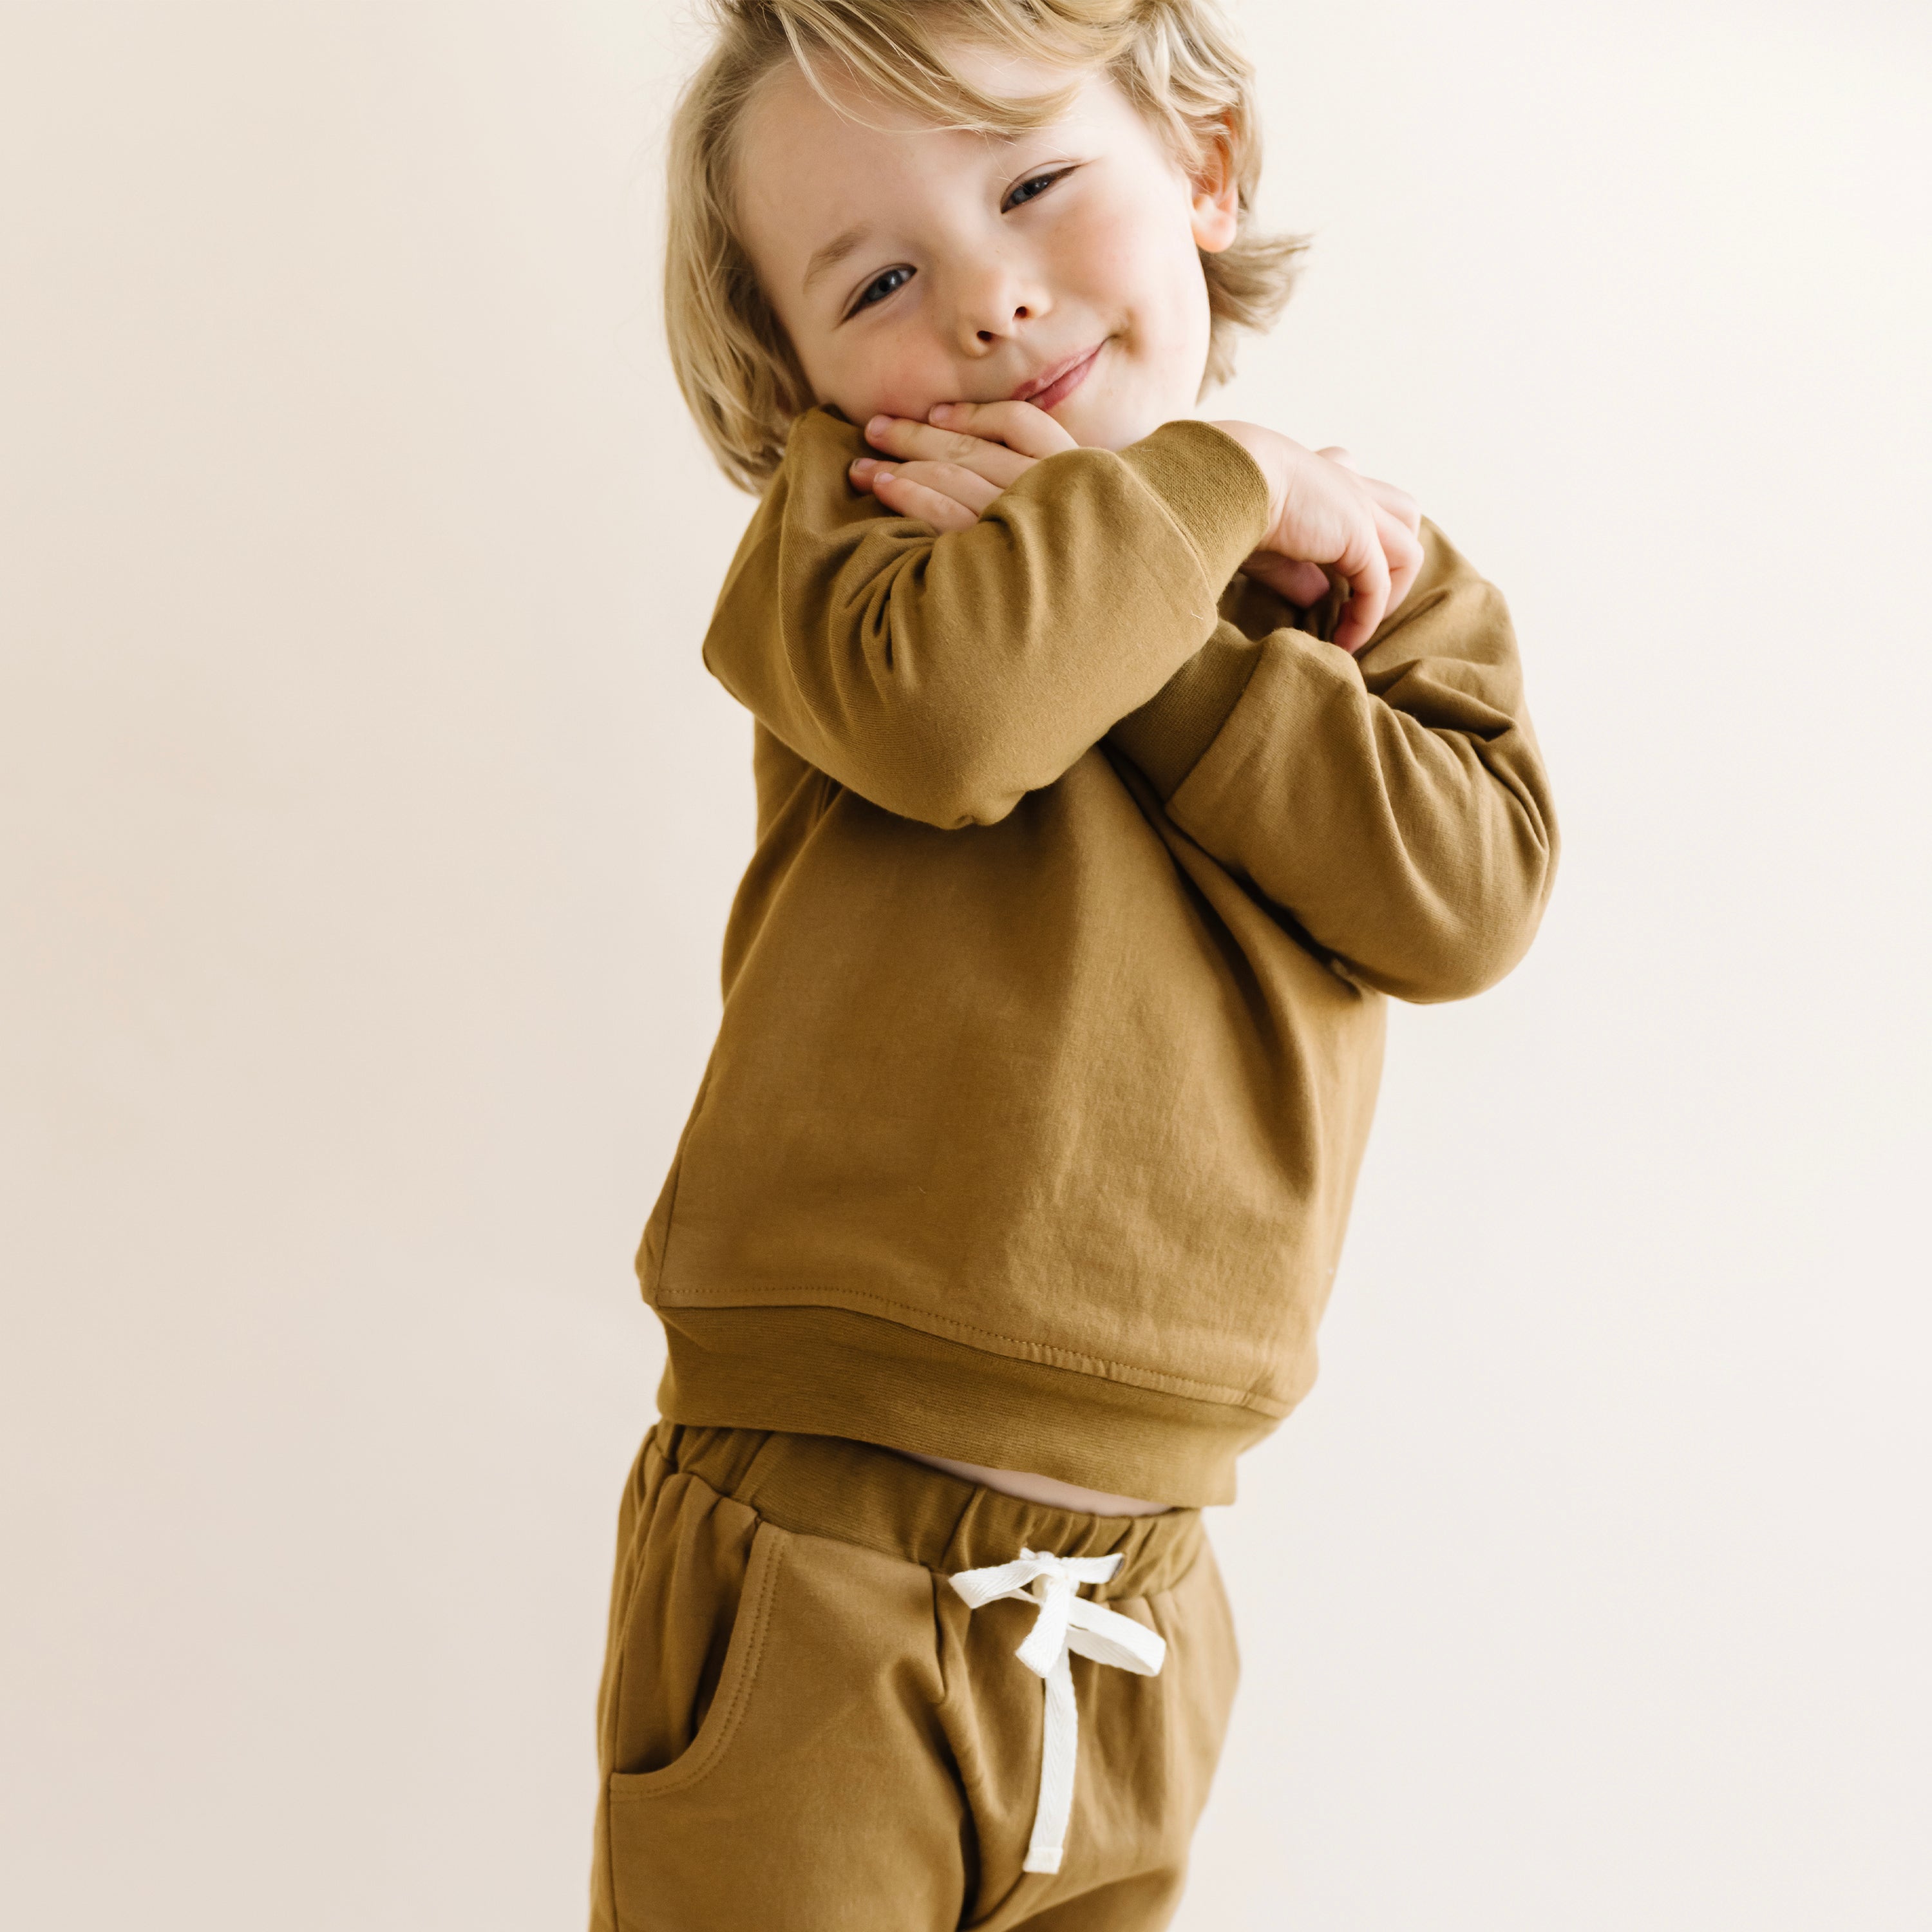 A young child wearing a cozy brown Organic Sweatshirt - Walnut Solid and matching pants from Organic Kids smiles charmingly with hands clasped under their chin, standing against a light beige background.